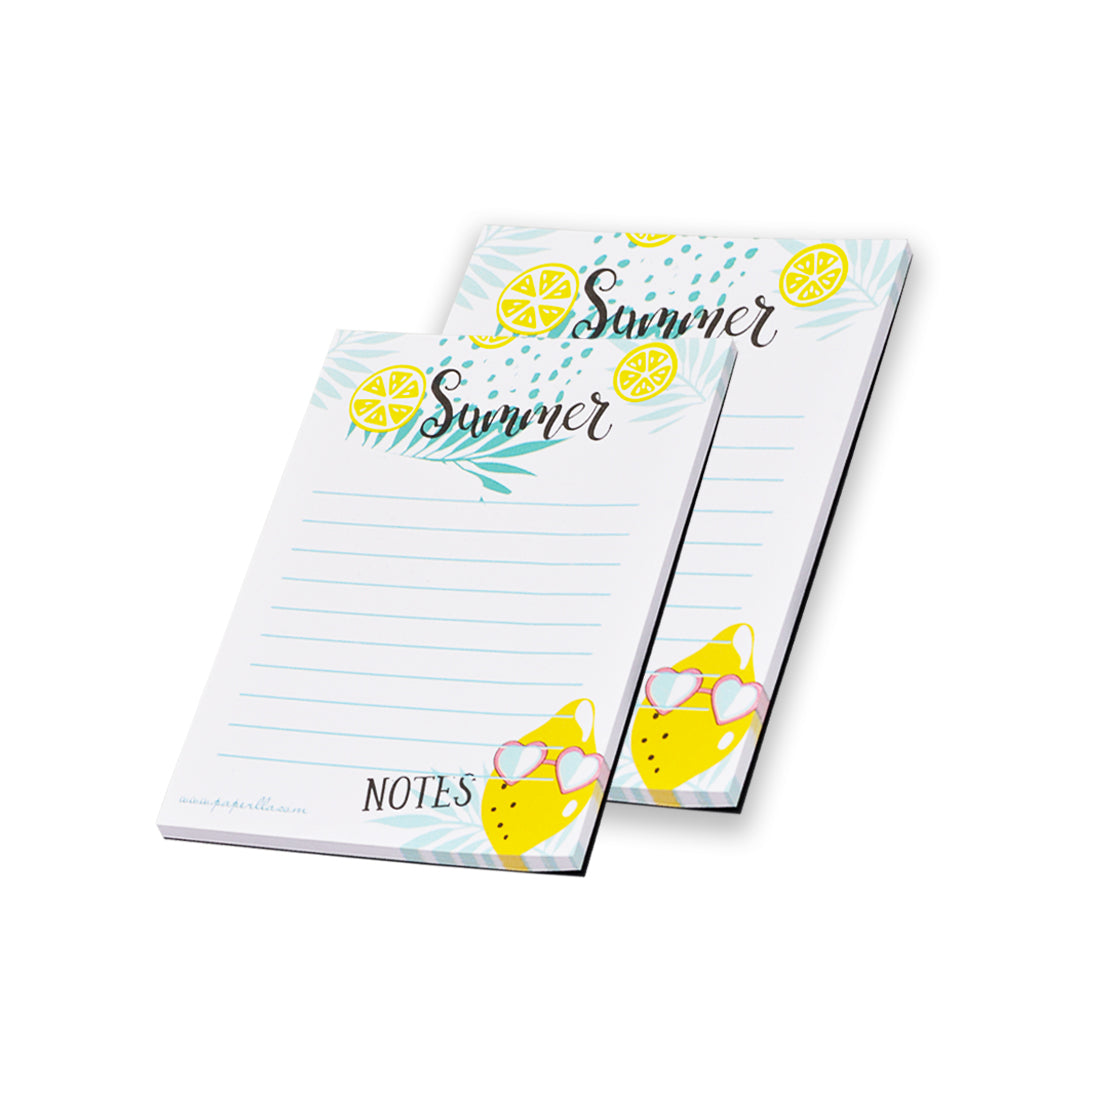 NOTE PADS FOR GIRLS, TO DO LIST DIARY UNDATED PLANNER DAILY JOURNAL WRIITNG PADS , GIFT FOR MOTHER AND FATHERS, SET OF 4